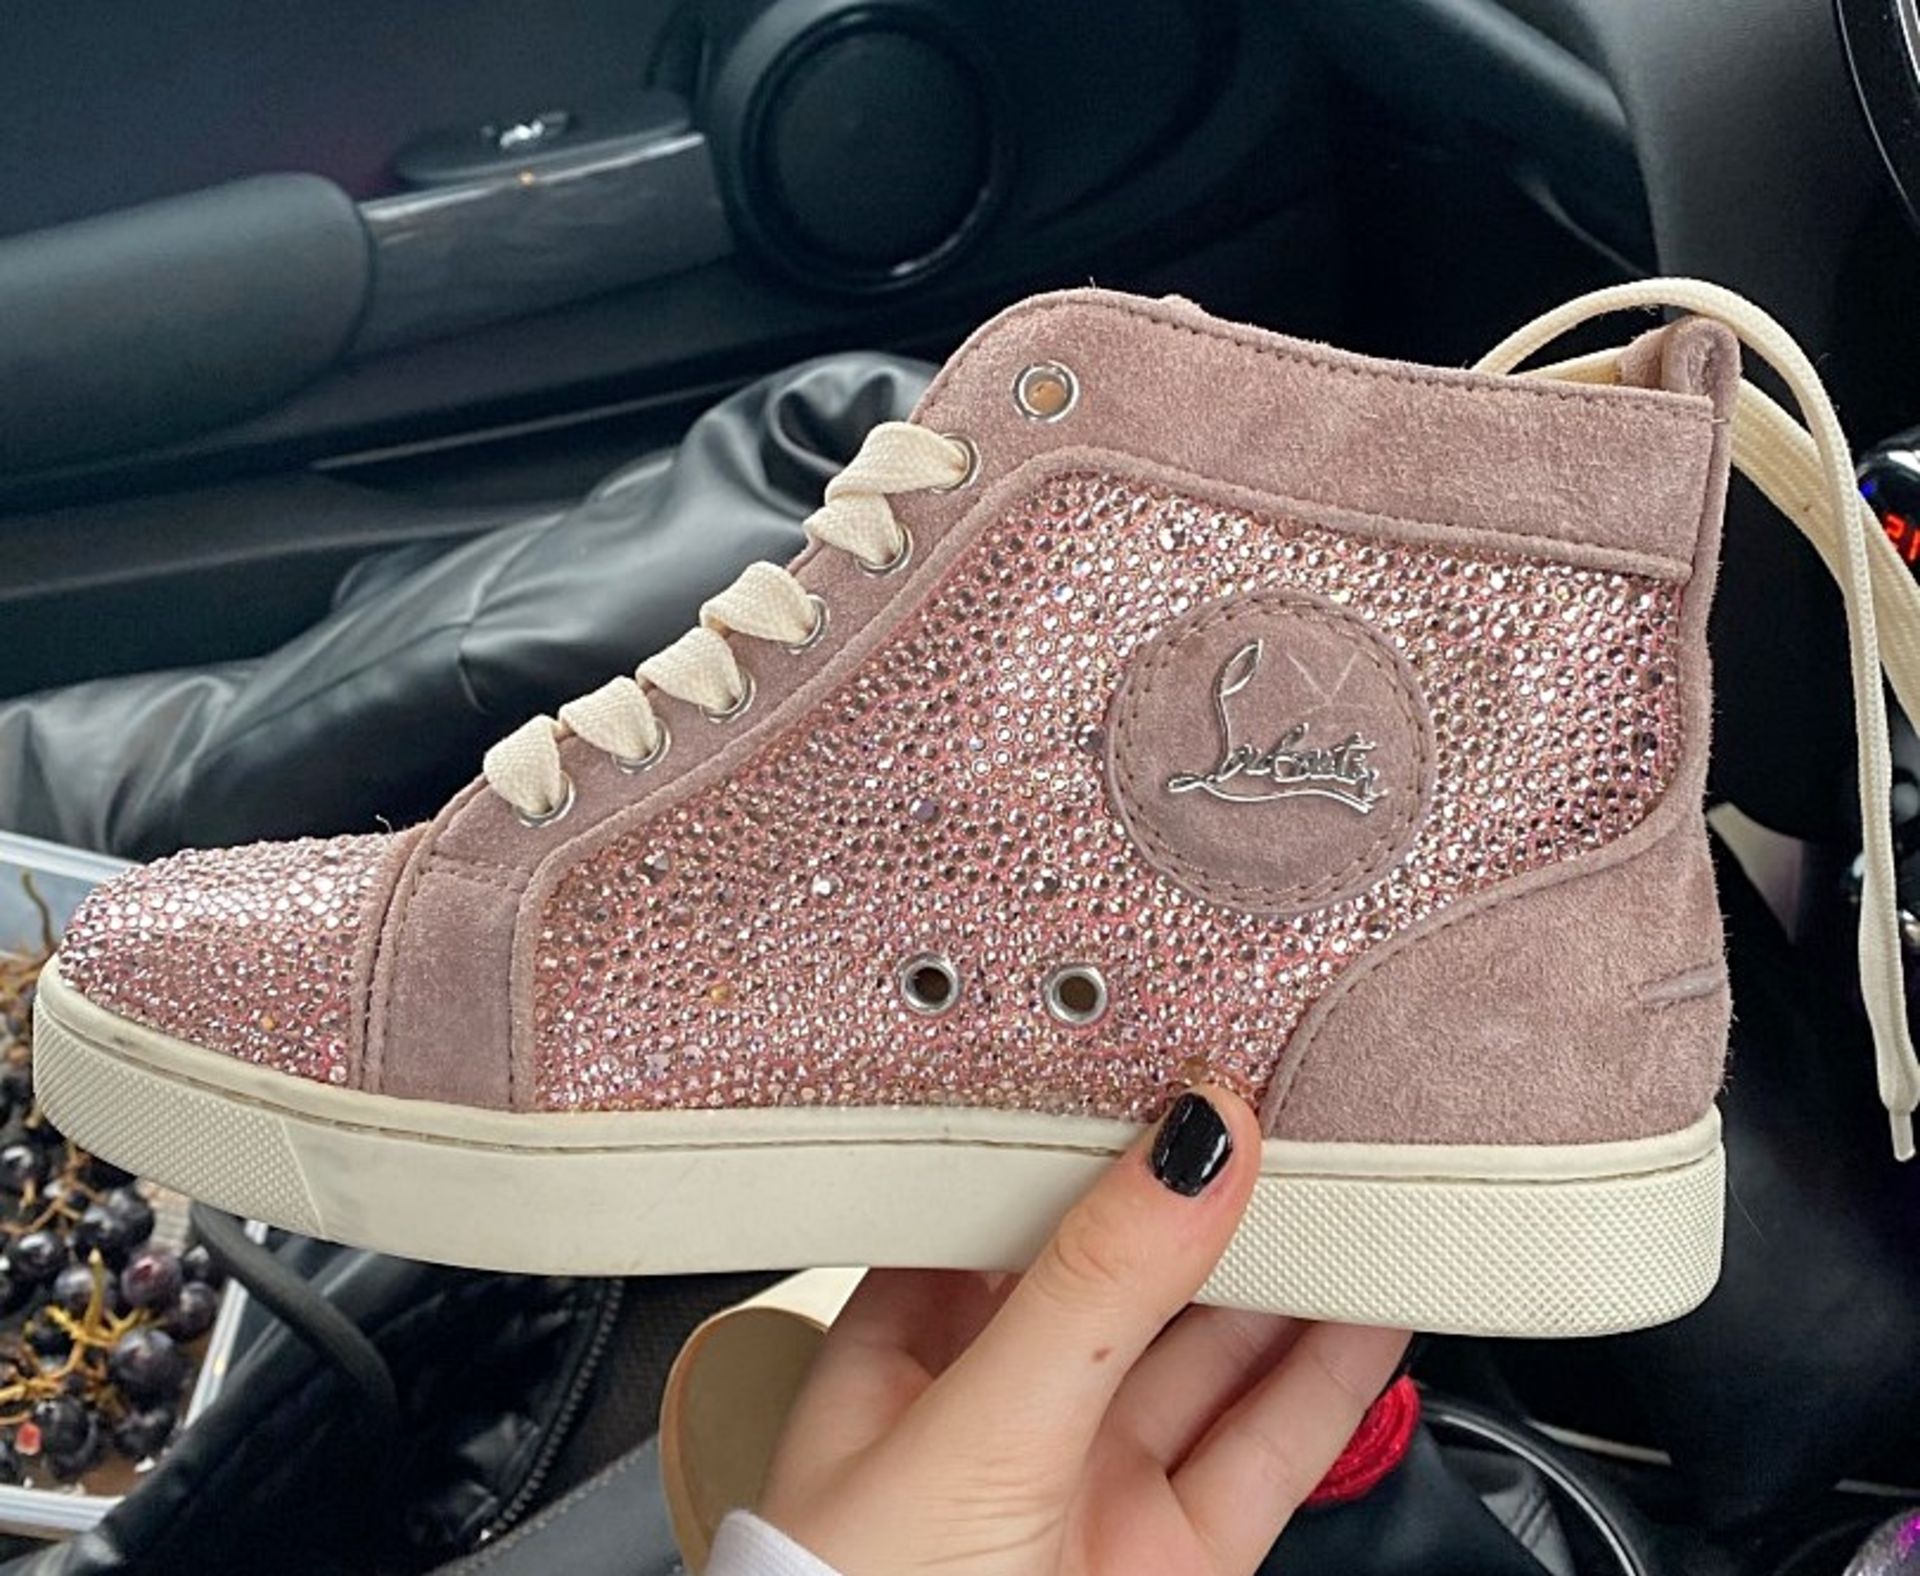 1 x Pair Of Genuine Christain Louboutin Sneakers In Pink - Size: 36 - Preowned in Good Condition - R